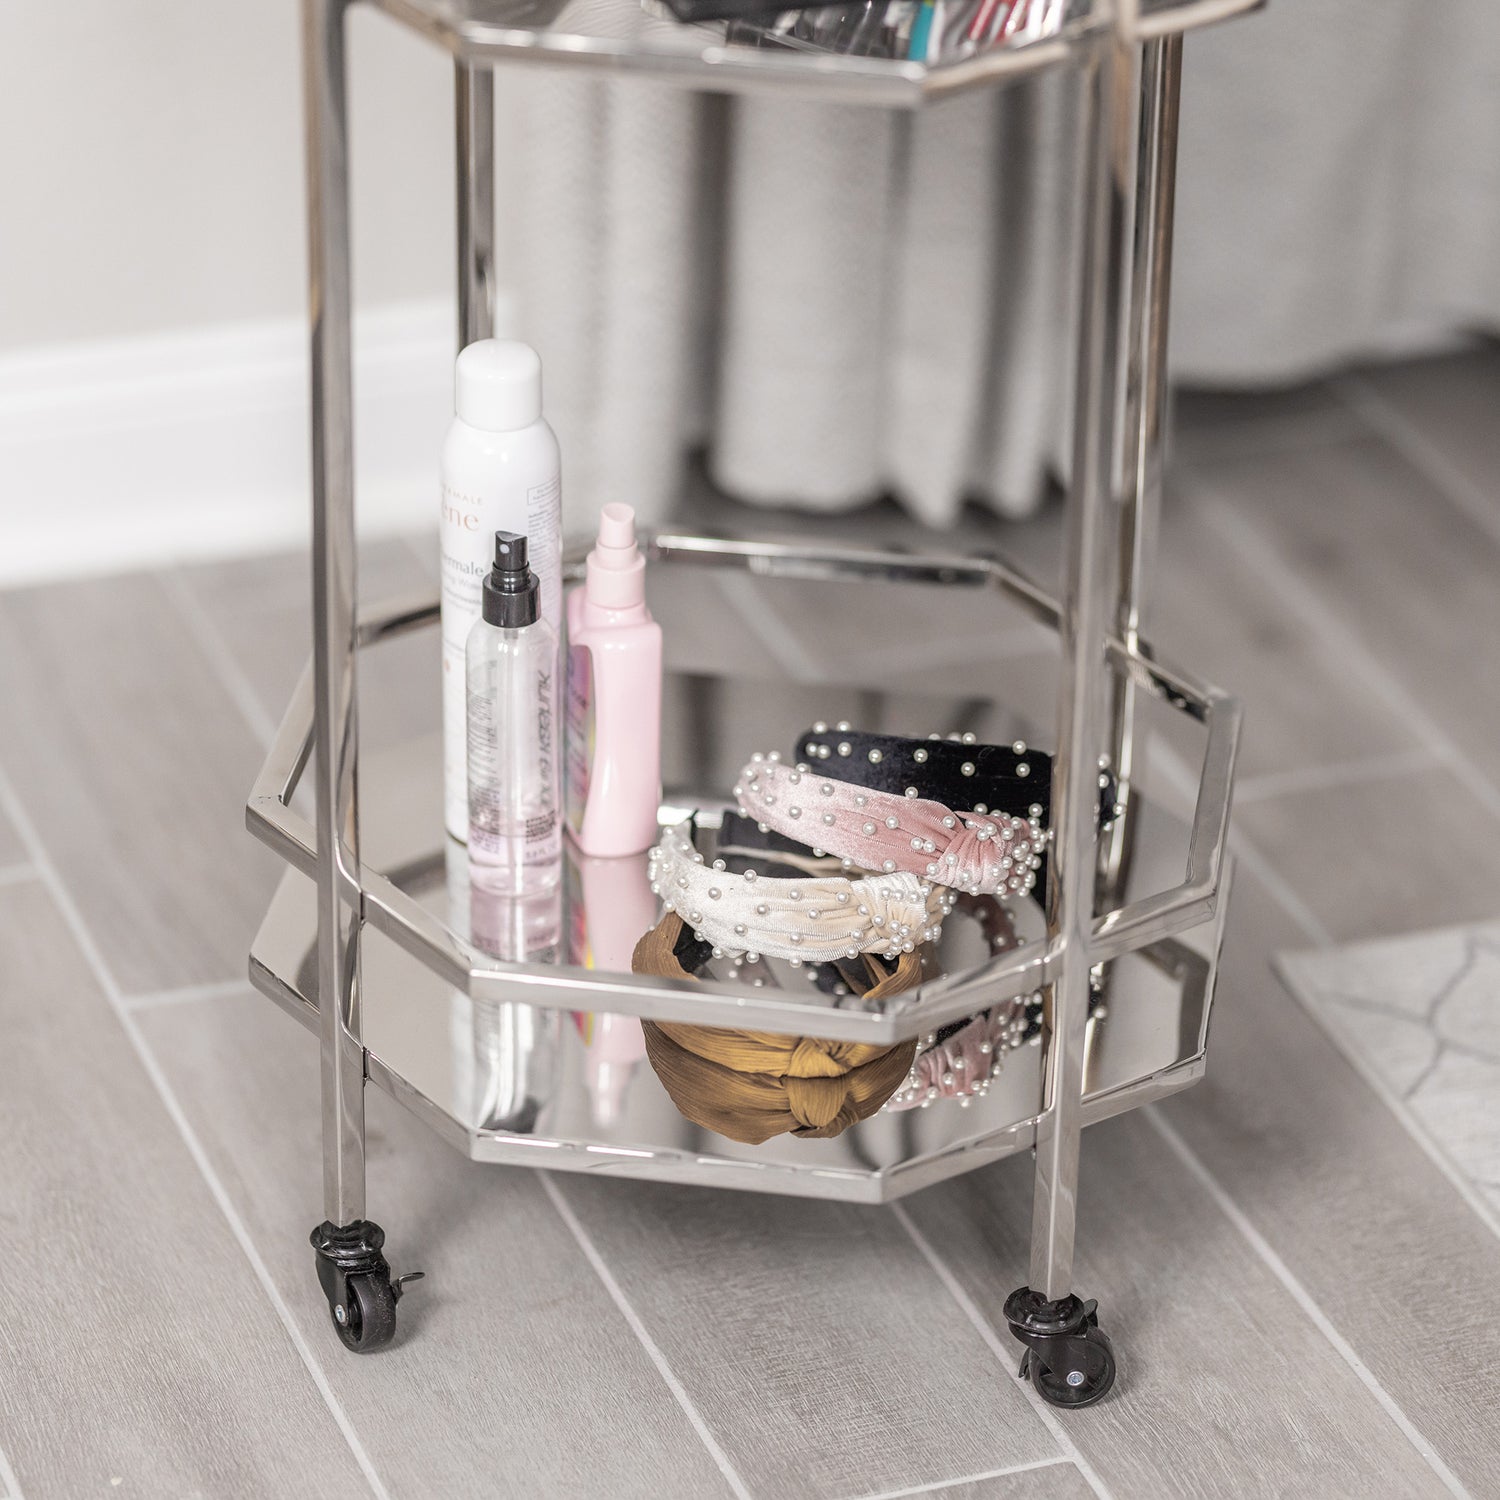 Small metal vanity with shelves to use in the bedroom or bathroom.  Holds personal items like makeup, hair accessories, body sprays, or perfumes.